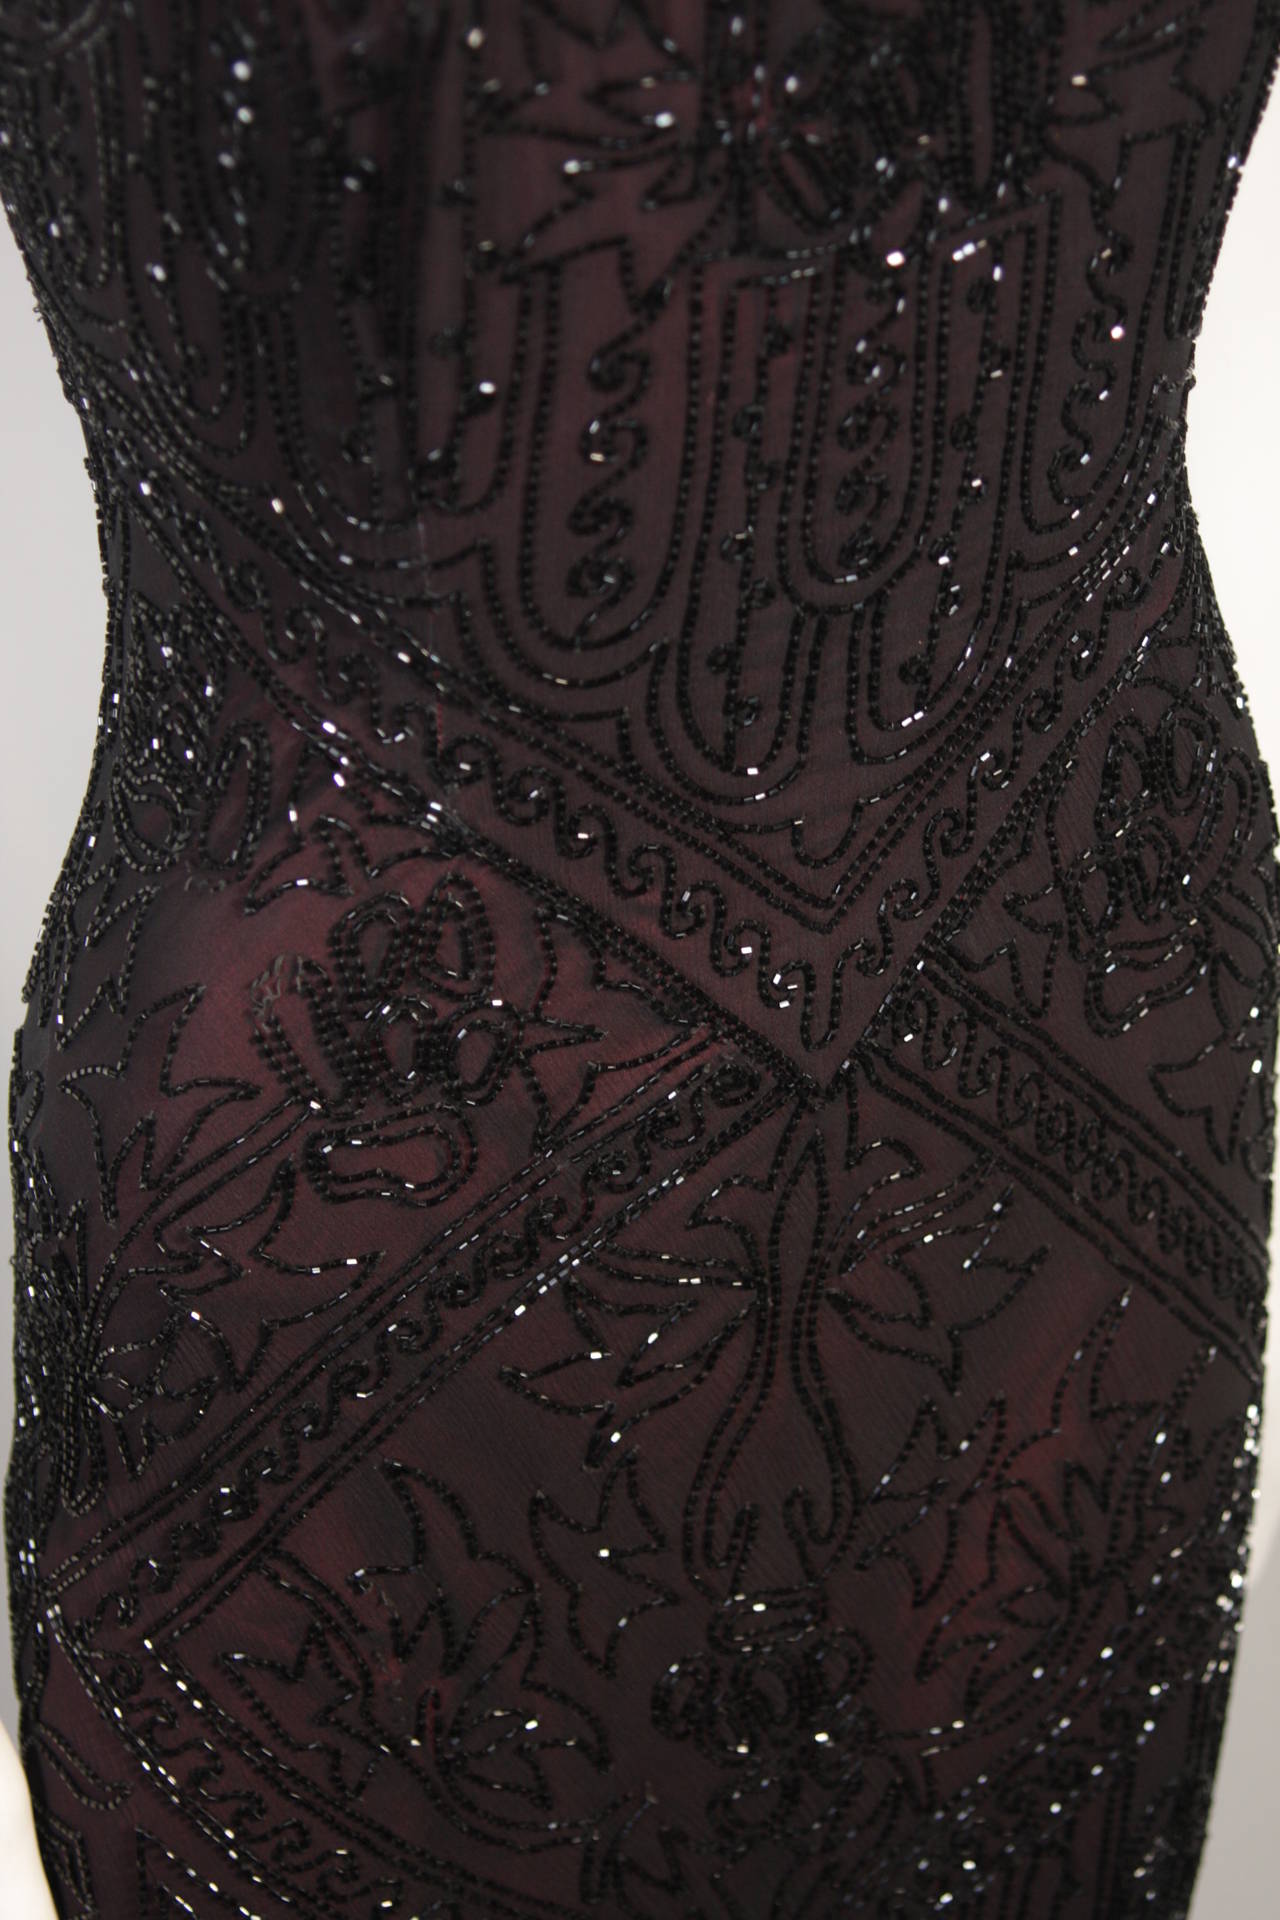 Les Habitudes Deco Inspired Burgundy Beaded Gown Size M 4